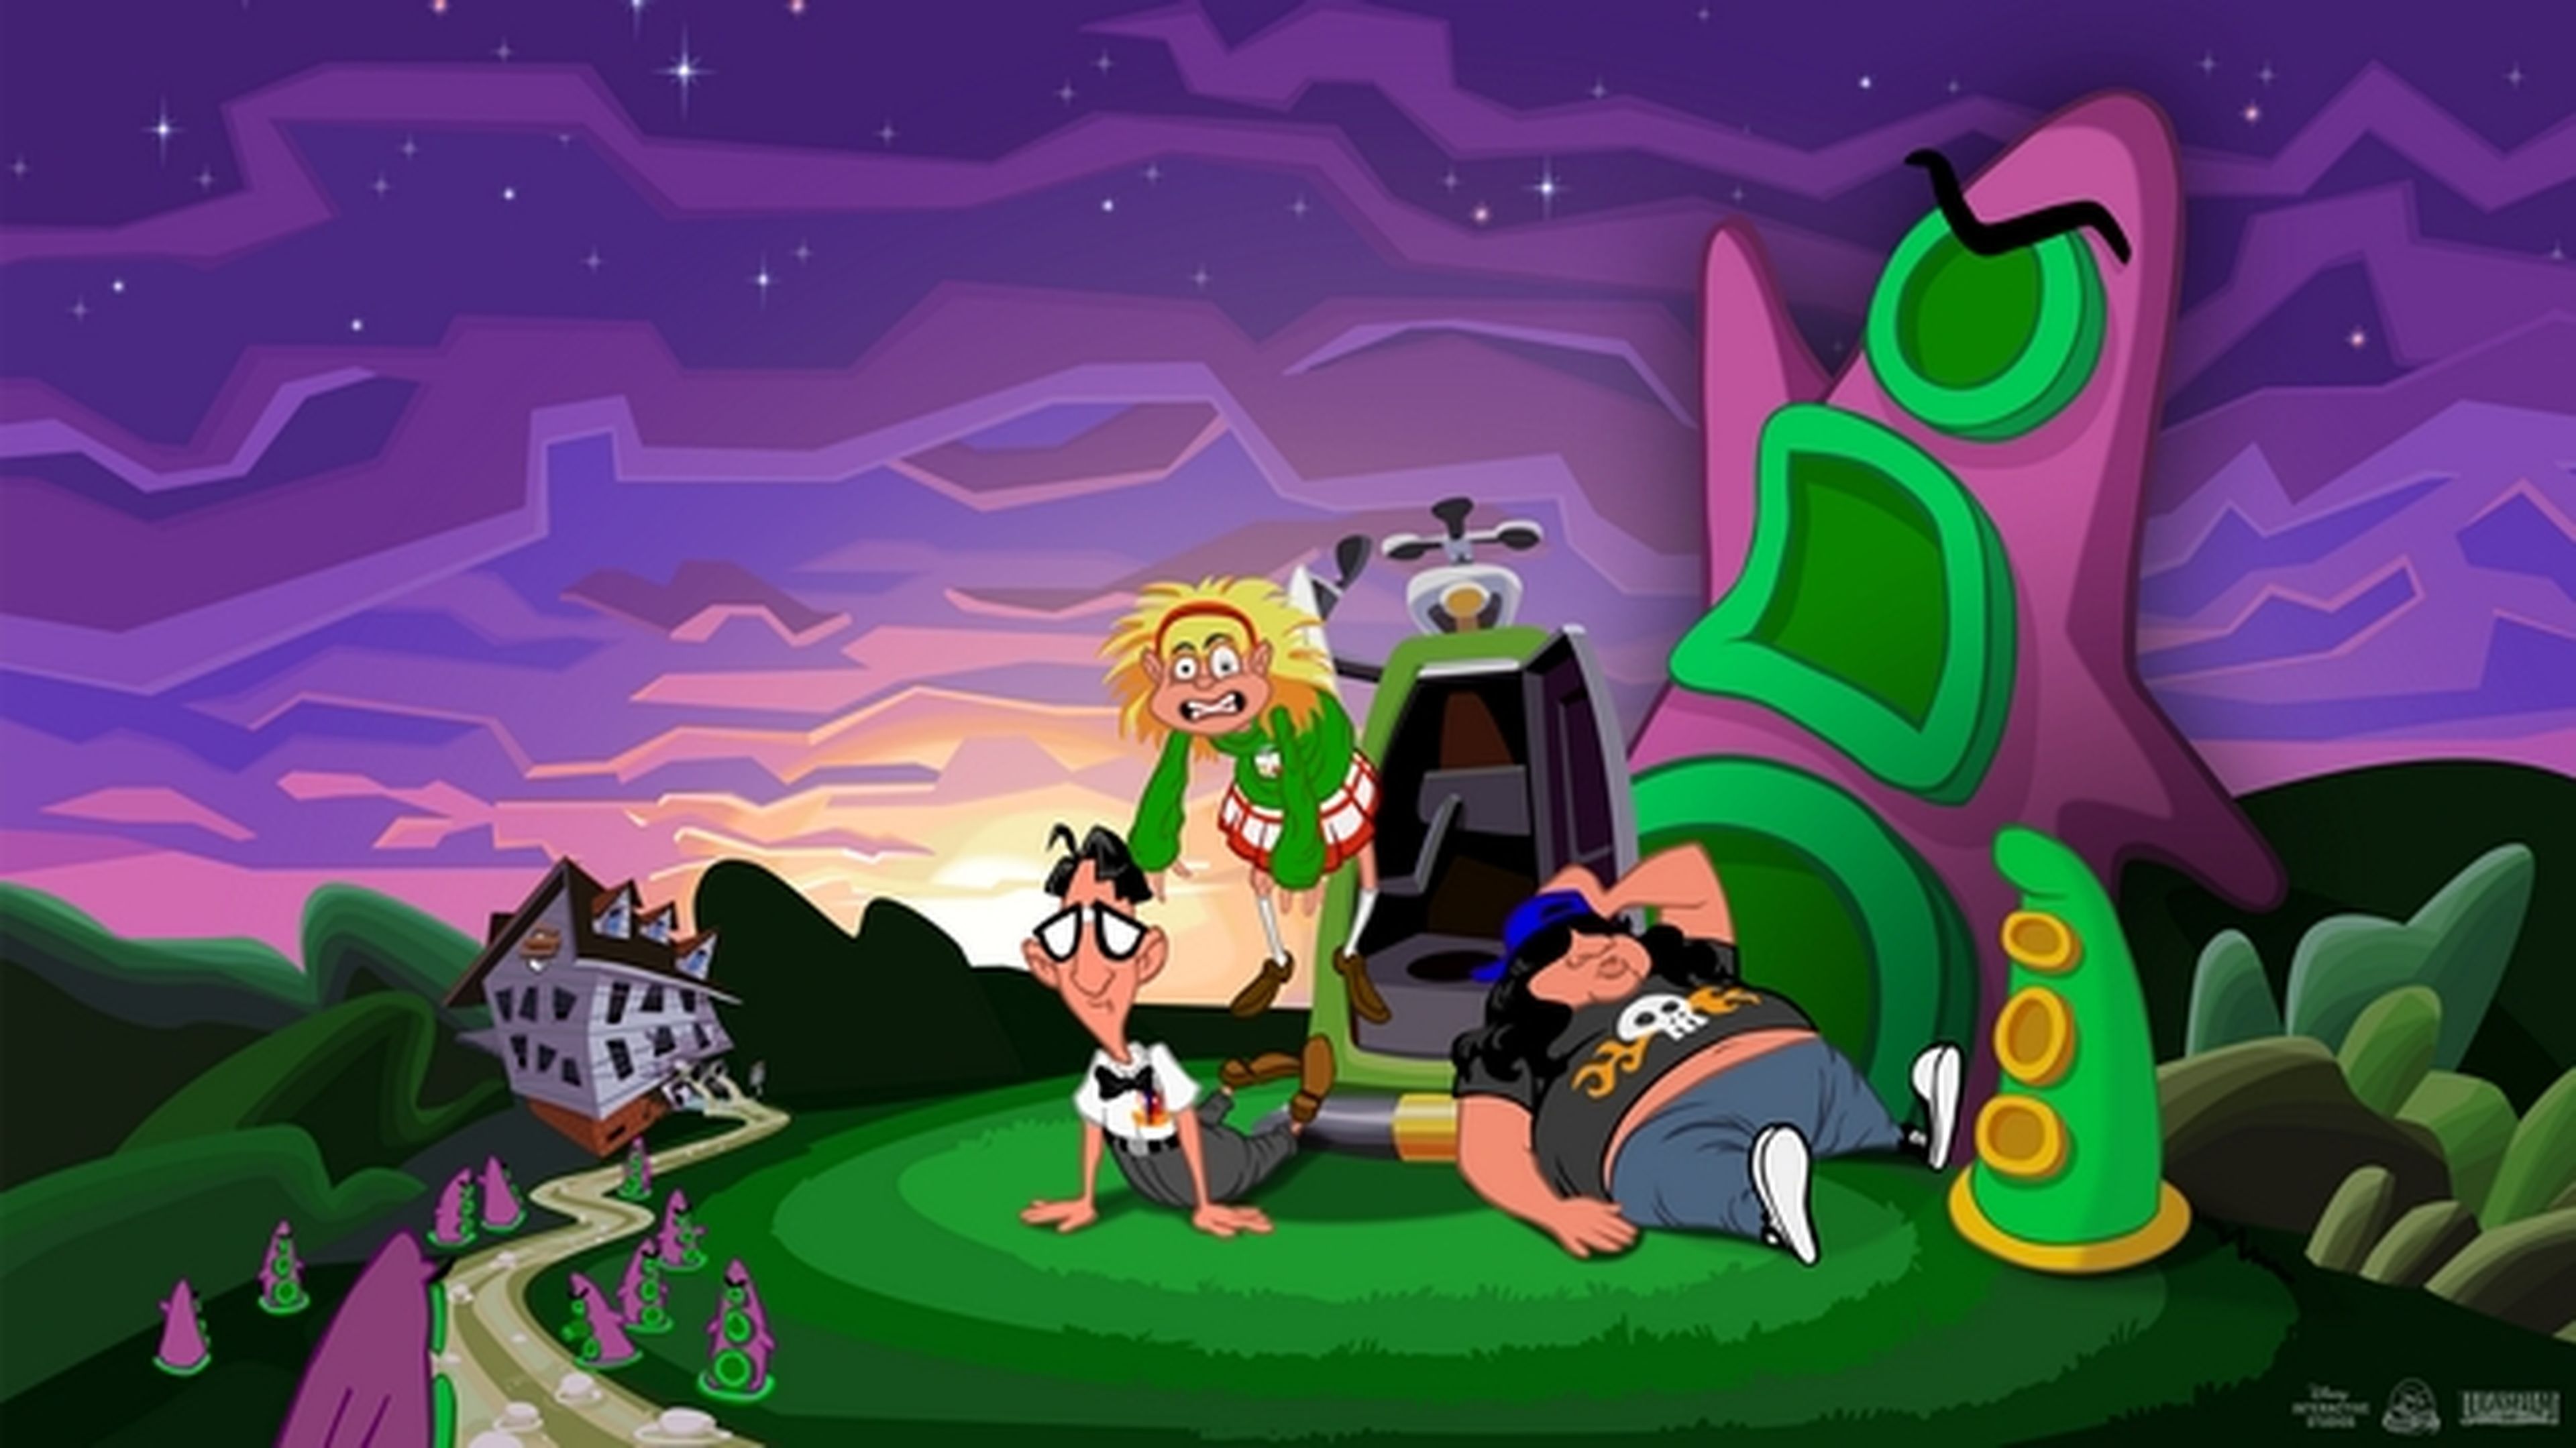 Descarga gratis Day of the Tentacle Remastered con Twitch